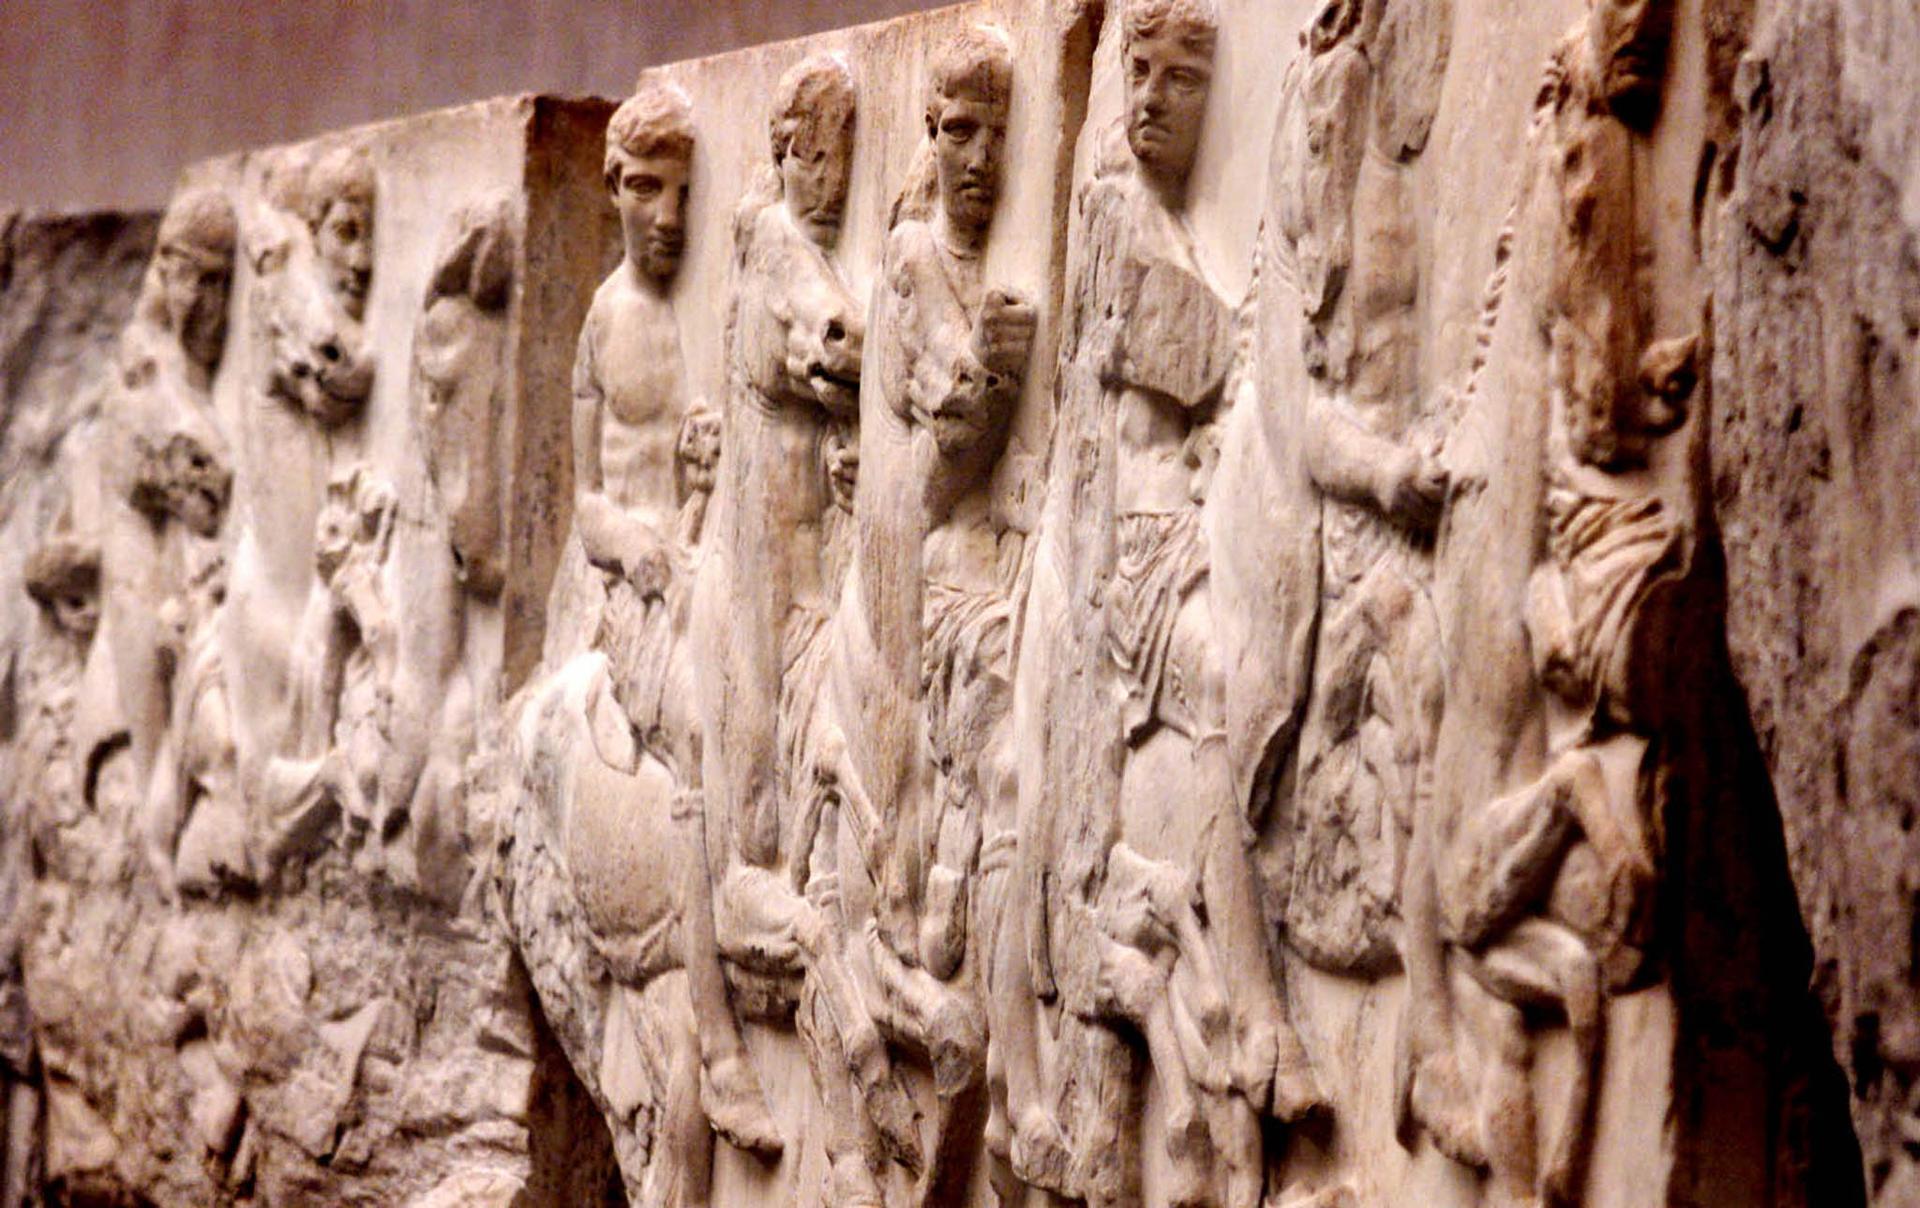 One of the ancient Greek reliefs in the Elgin Marbles collection, on display at the British Museum in London.